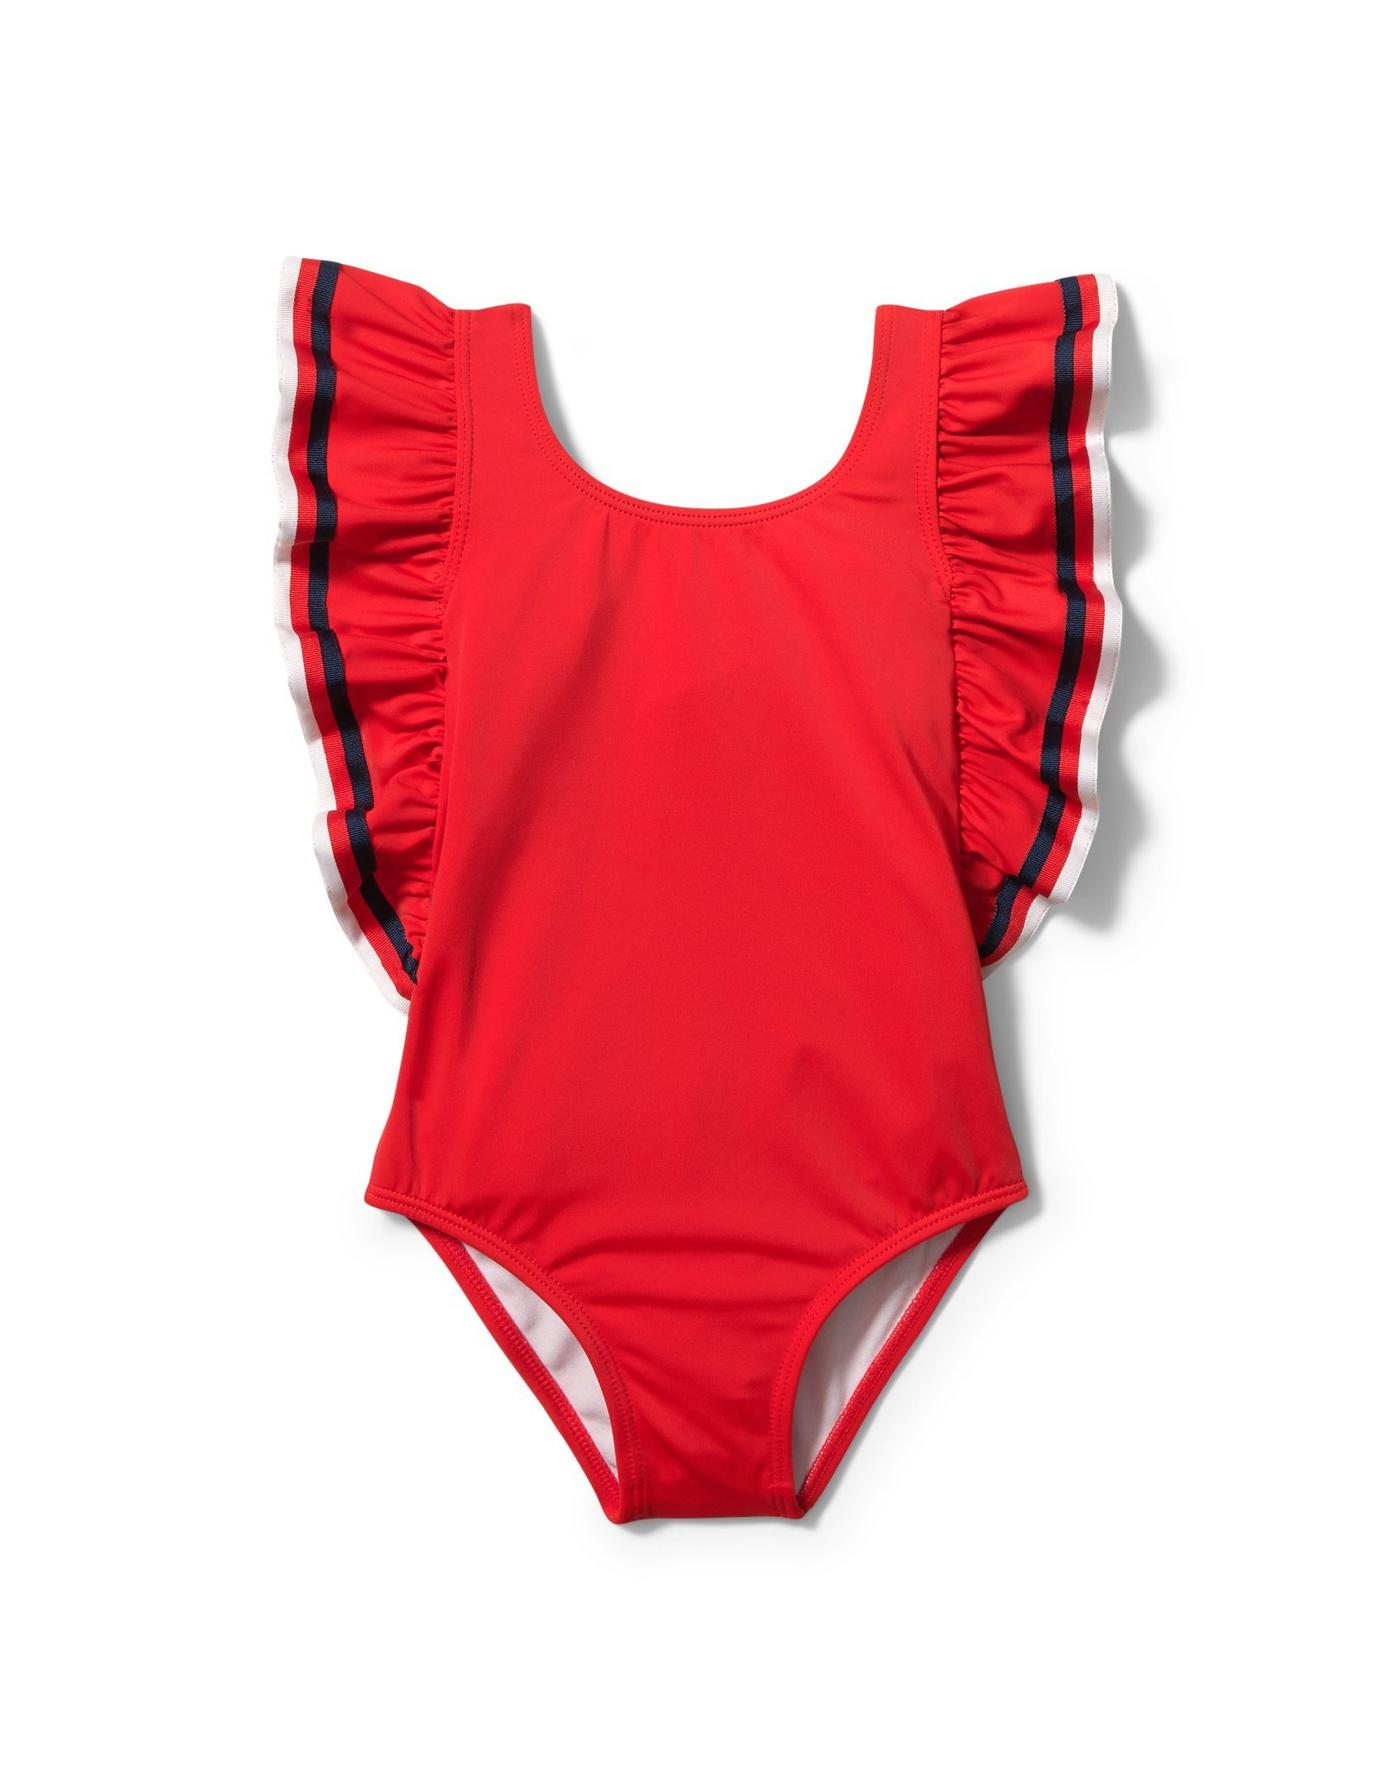 boy and girl swimwear, red flutter sleeve swimsuit one-piece